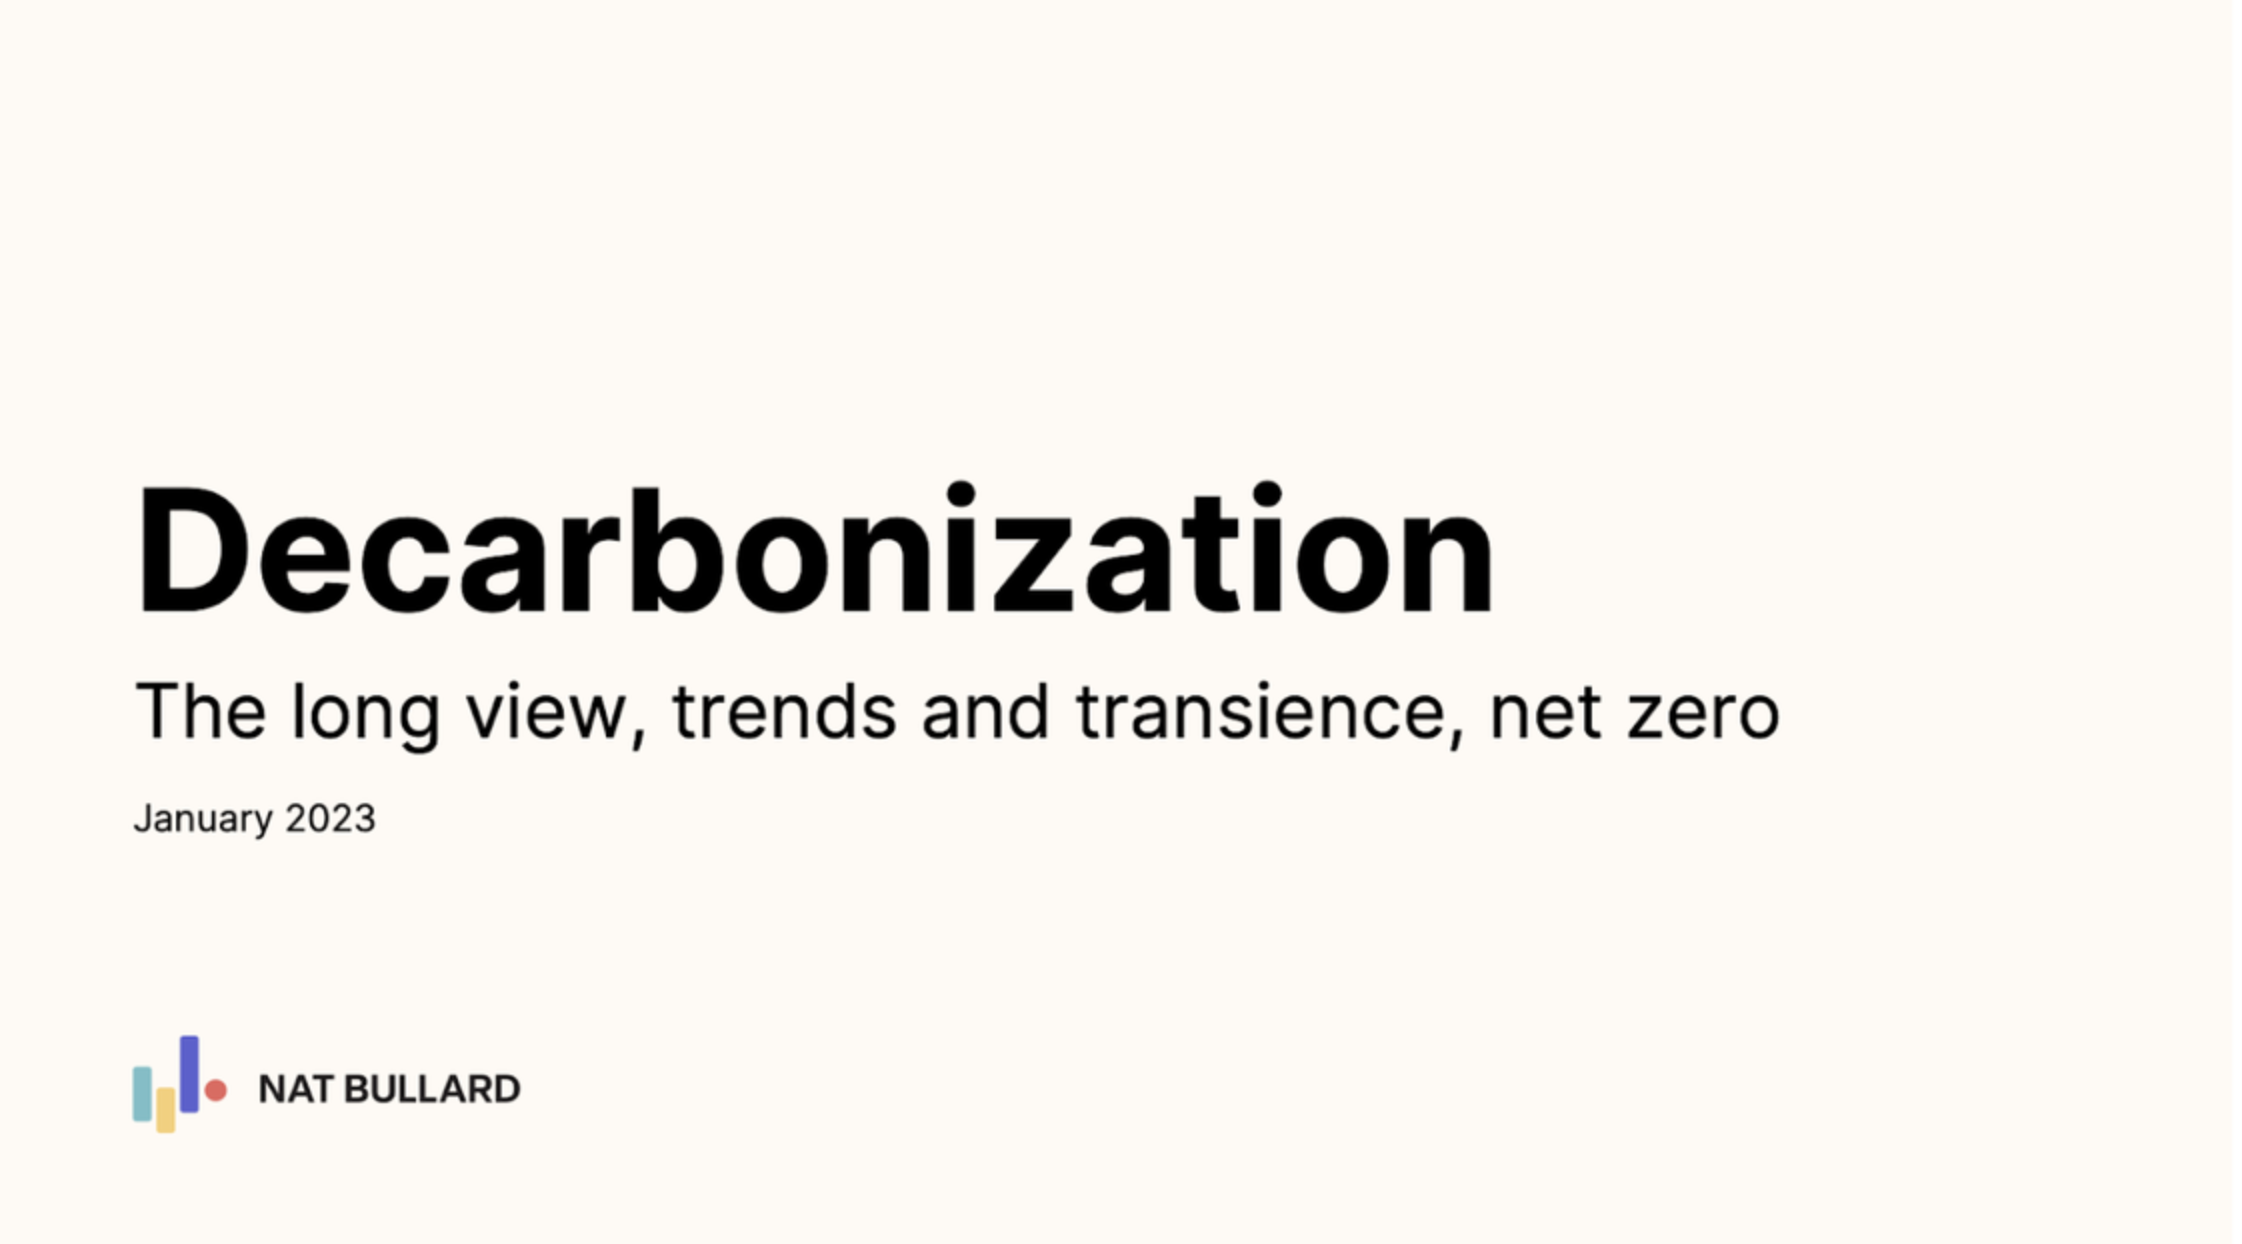 Decarbonization-The-long-view-trends-and-transience-net-zeo